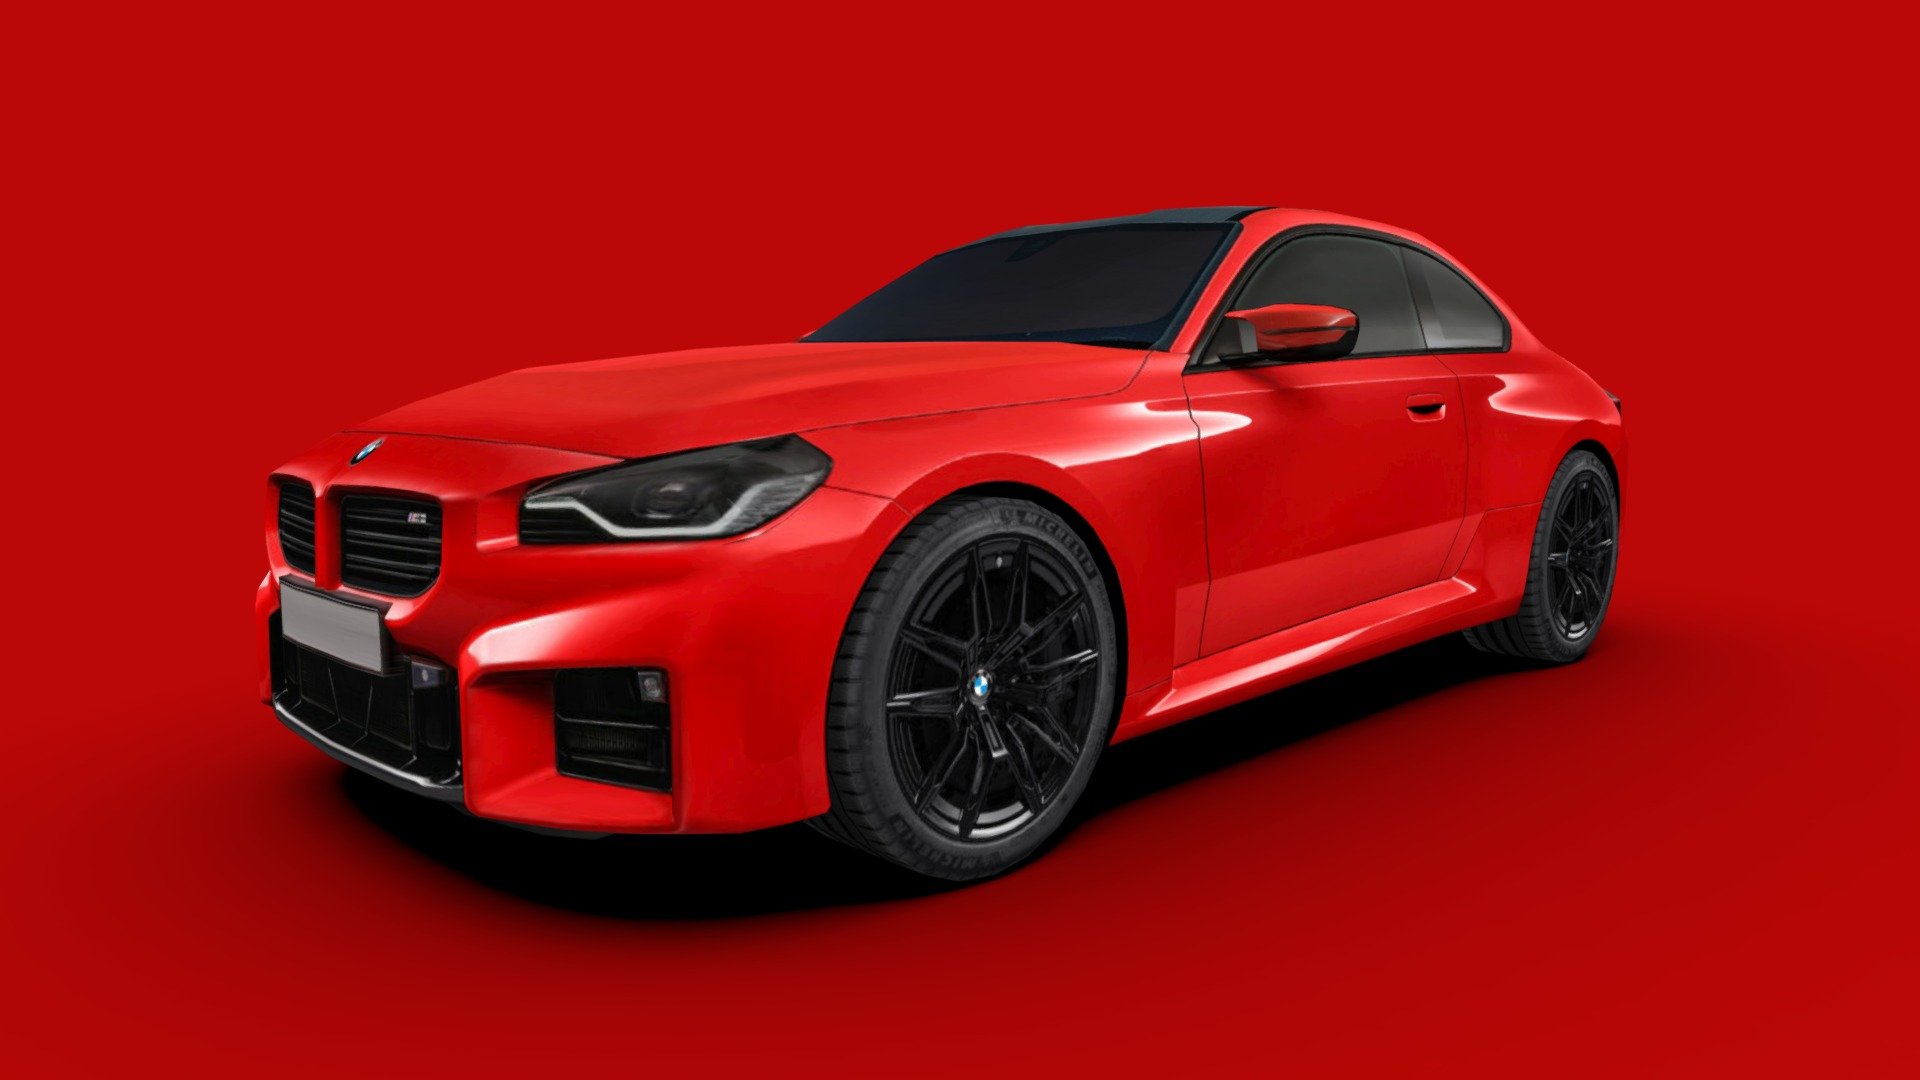 3d model of the 2023 BMW M2, a sport compact car.

The model is very low-poly, full-scale, real photos texture (single 2048 x 2048 png).

Package includes 5 file formats and texture (3ds, fbx, dae, obj and skp)

Hope you enjoy it.

José Bronze - BMW M2 2023 - Buy Royalty Free 3D model by Jose Bronze (@pinceladas3d) 3d model